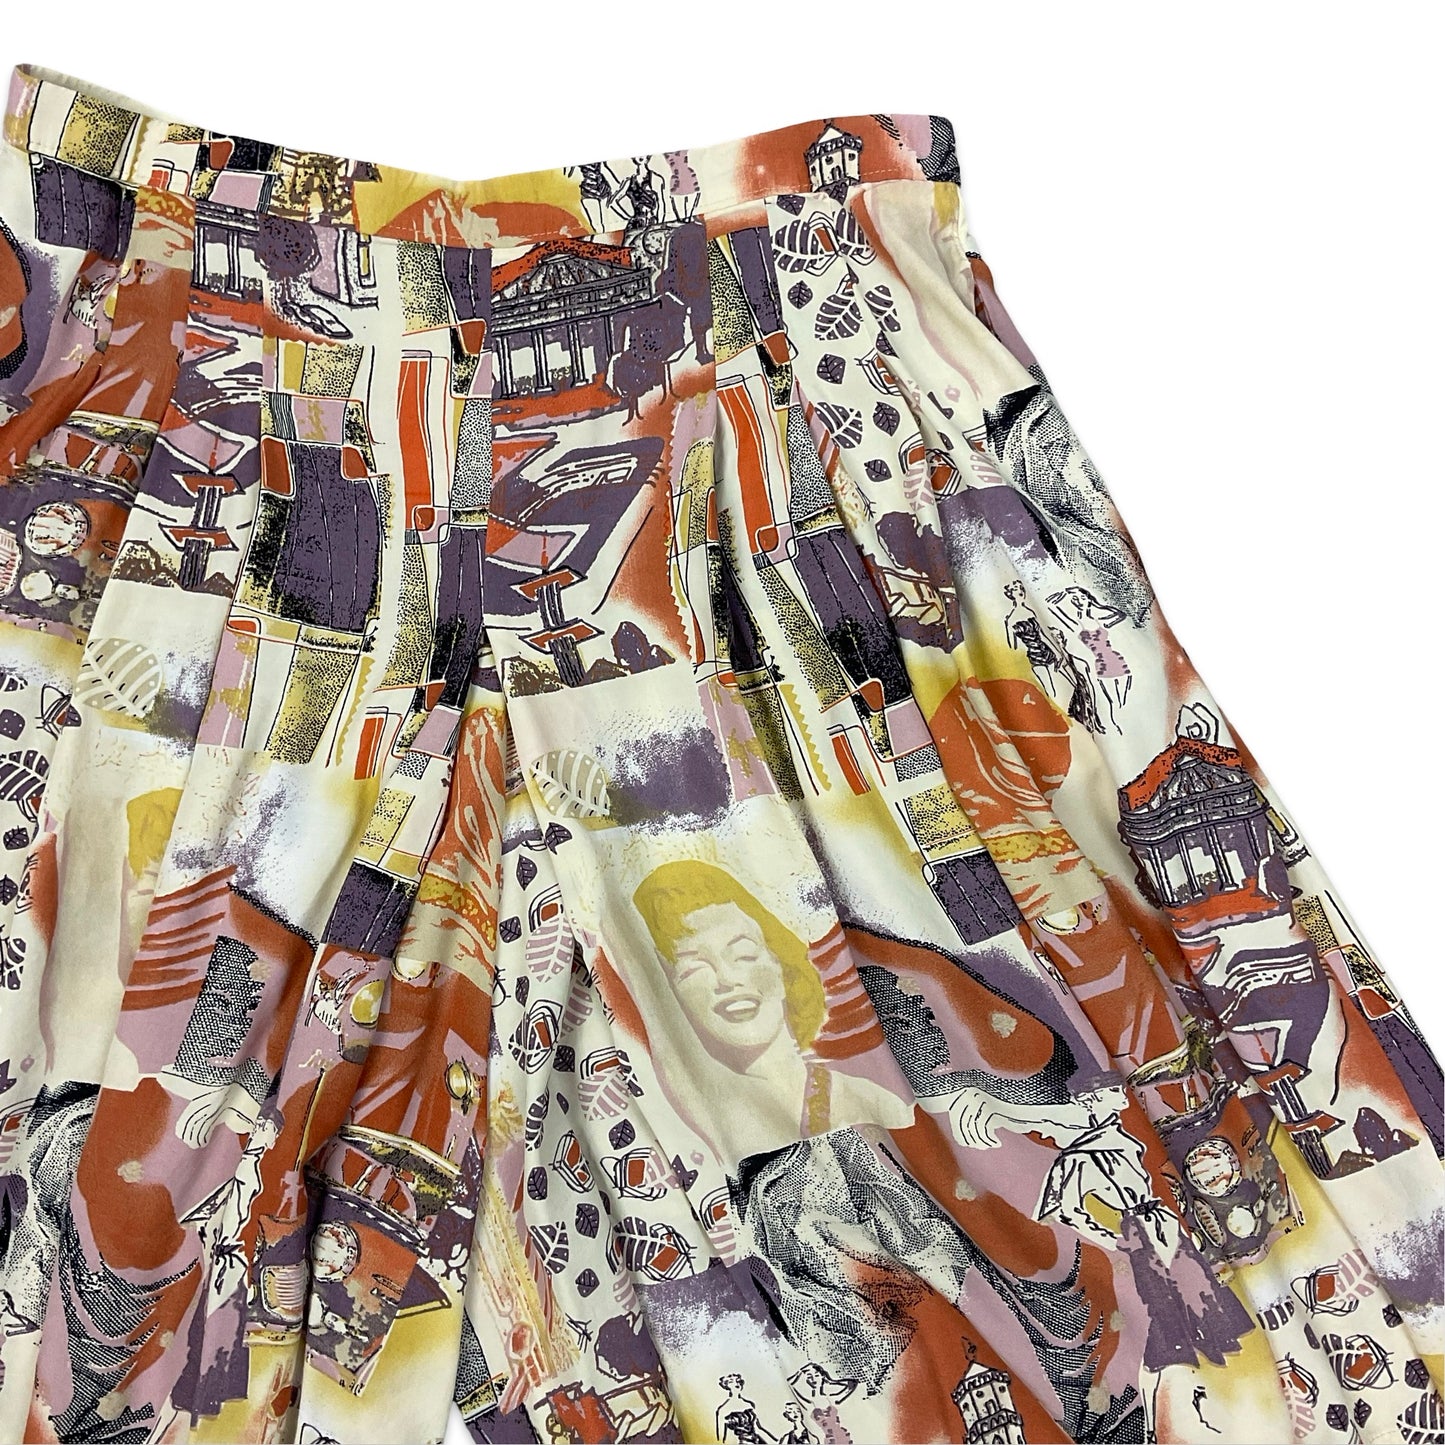 Vintage Multicolour Abstract Print Wide Leg Pleated Shorts 16